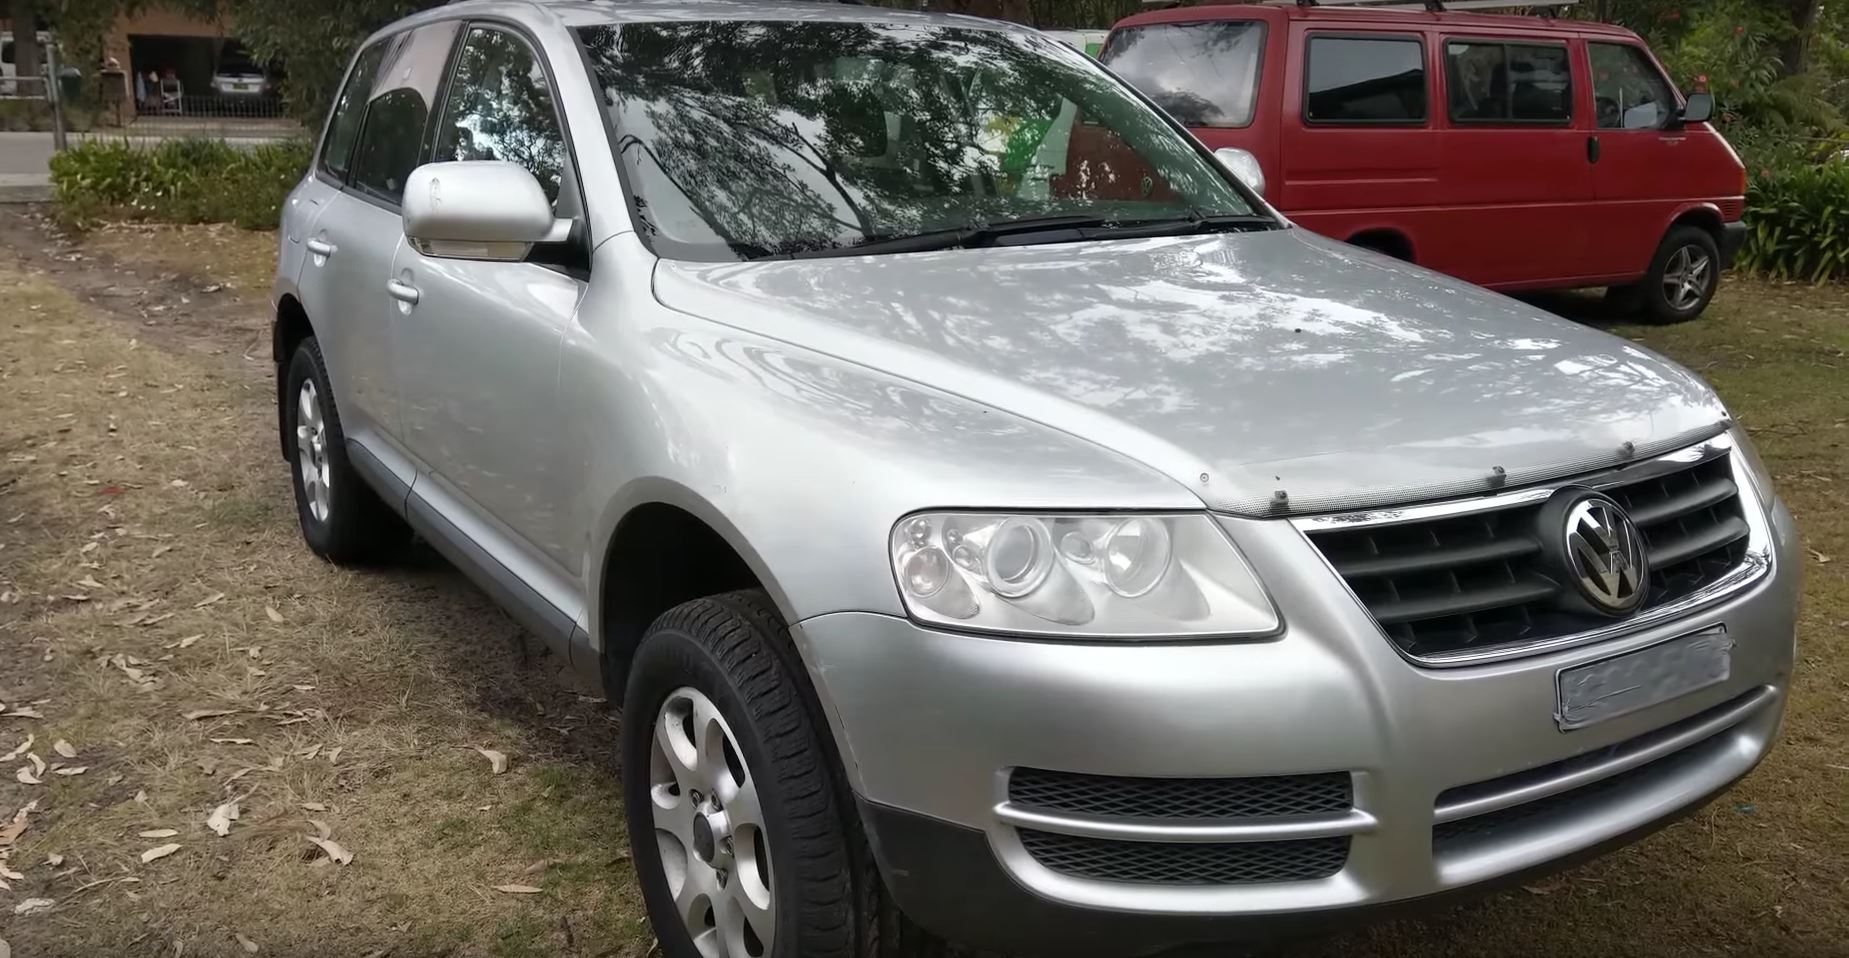 Volkswagen Touareg 7L Has a Water Retention Problem Thanks to